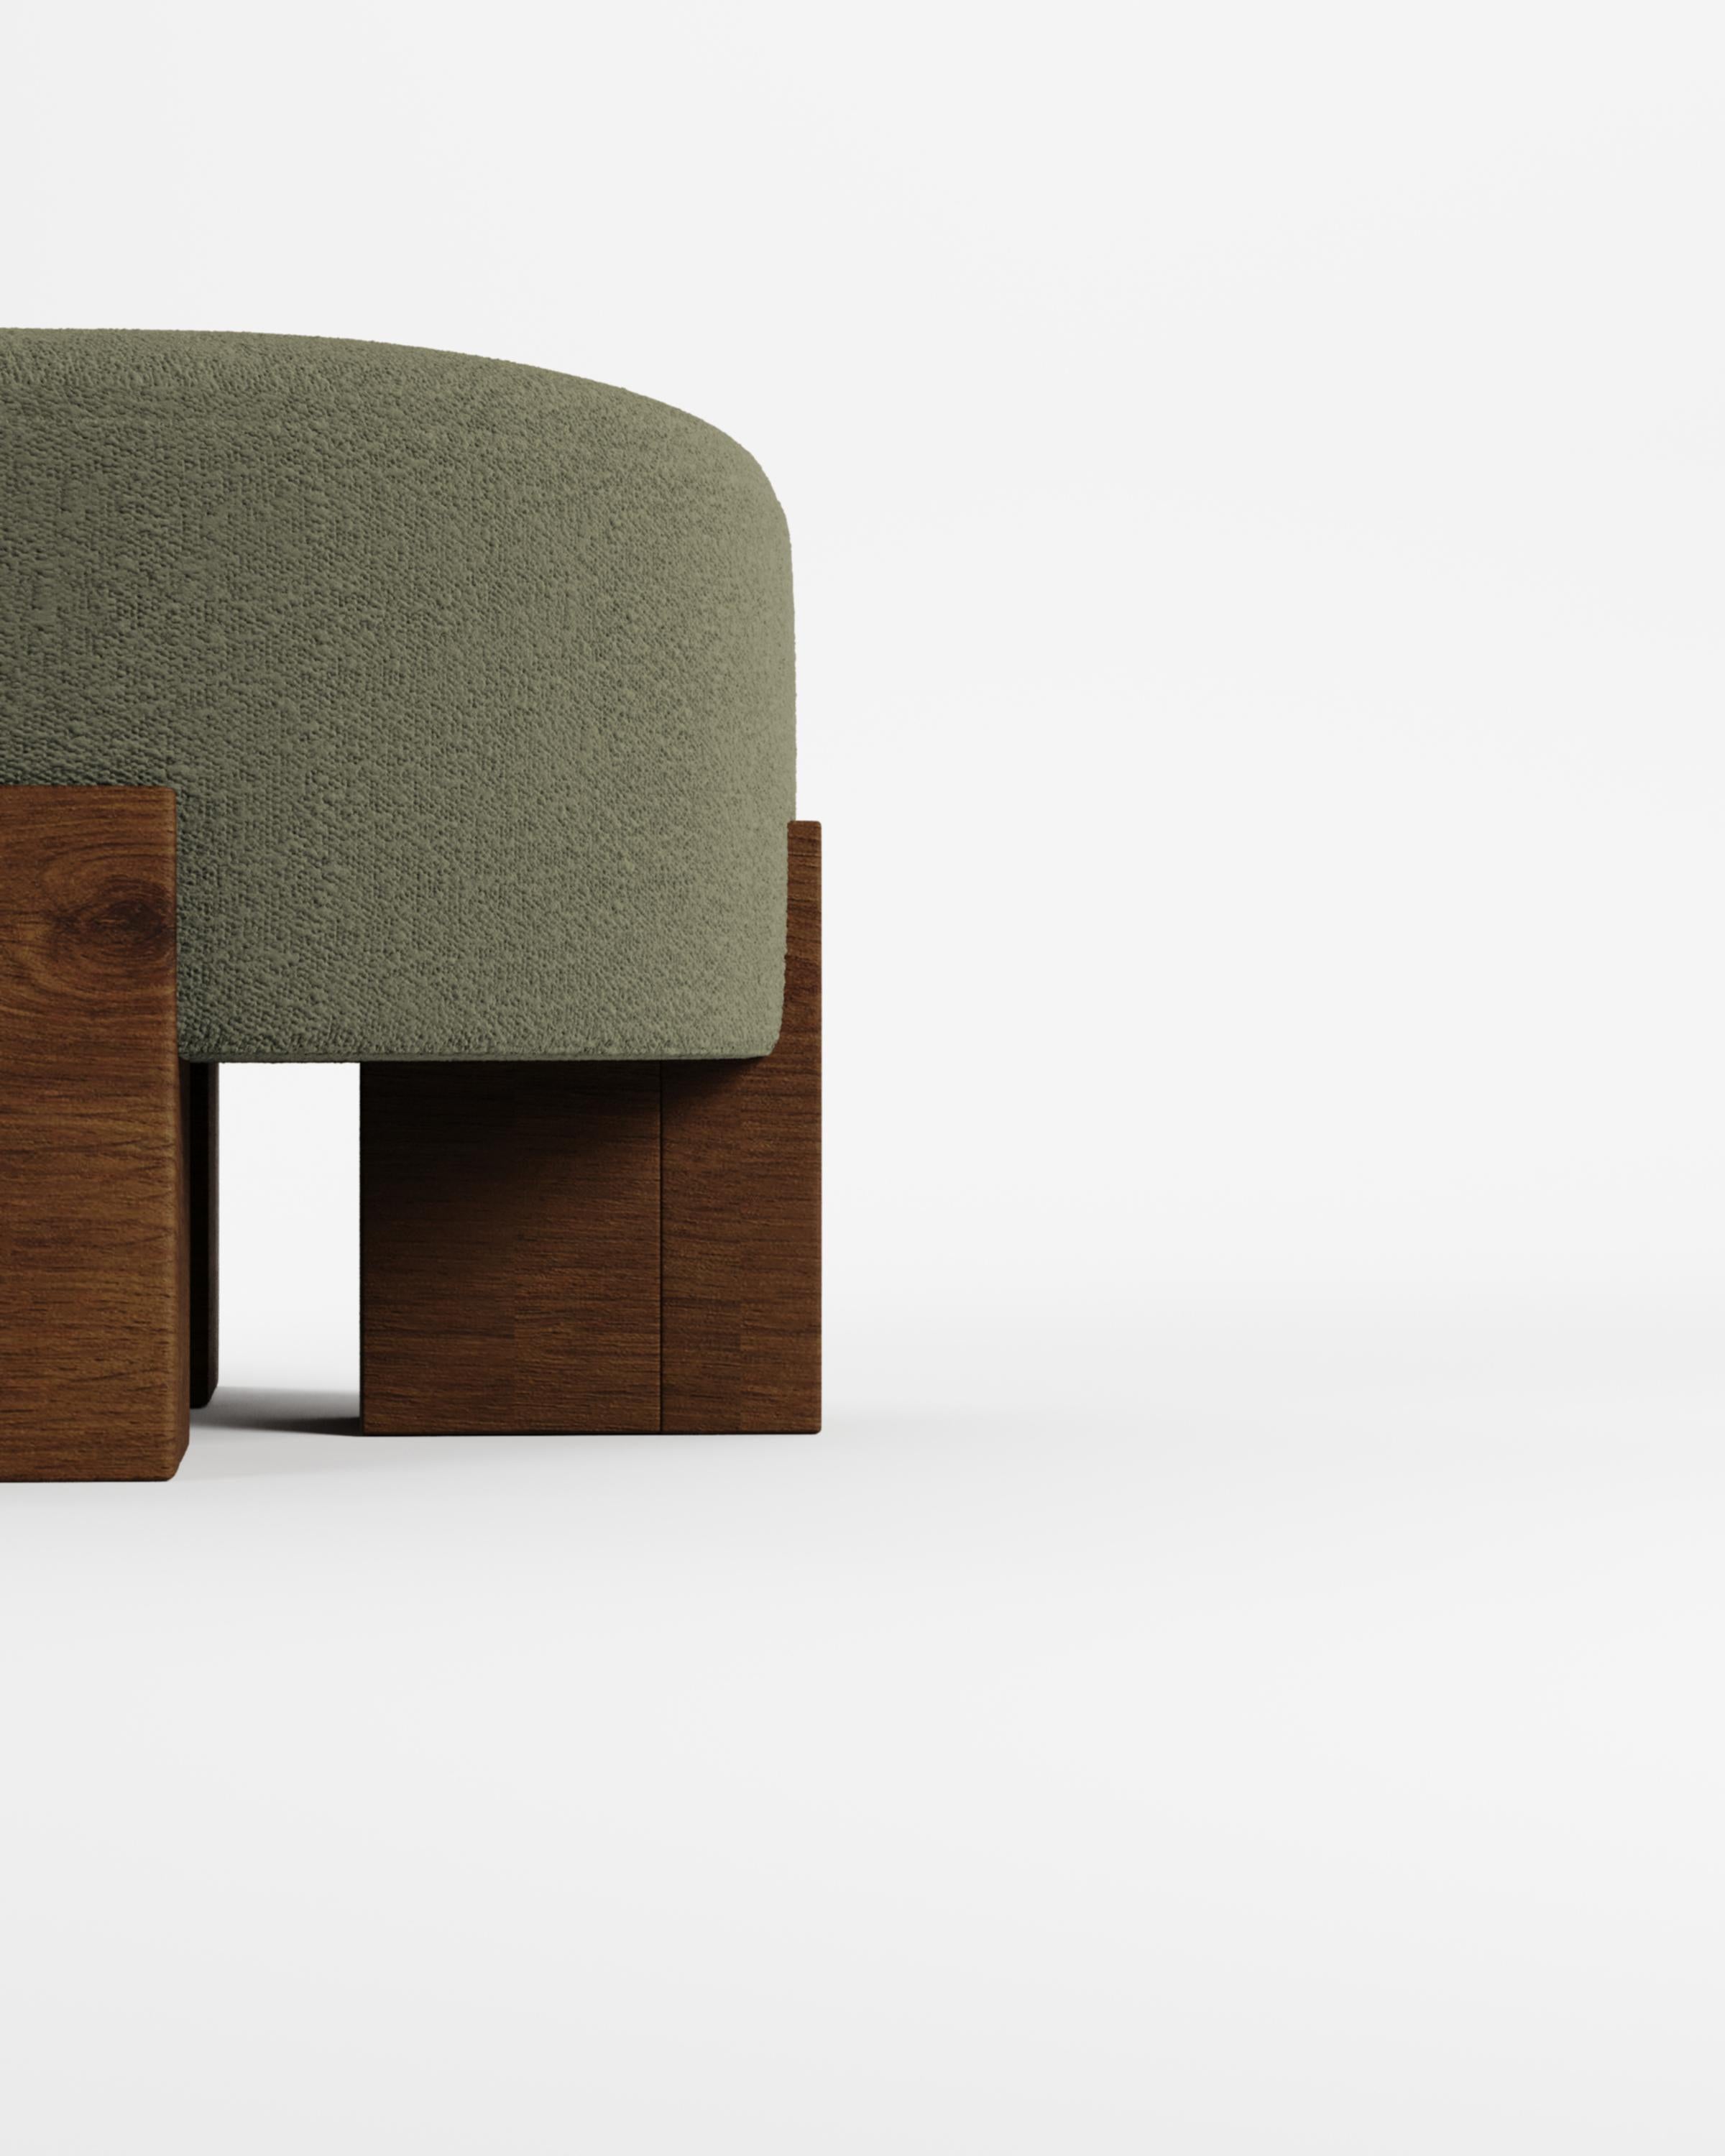 Contemporary Modern Cassete Puff in Boucle Fabric by Alter Ego for Collector Studio

The piece is underpinned by a Minimalist and sophistication aesthetic of clean lines.

Dimensions
Ø 60 cm 23”
H 38 cm 15”

Product features
Structure in Oak wood.